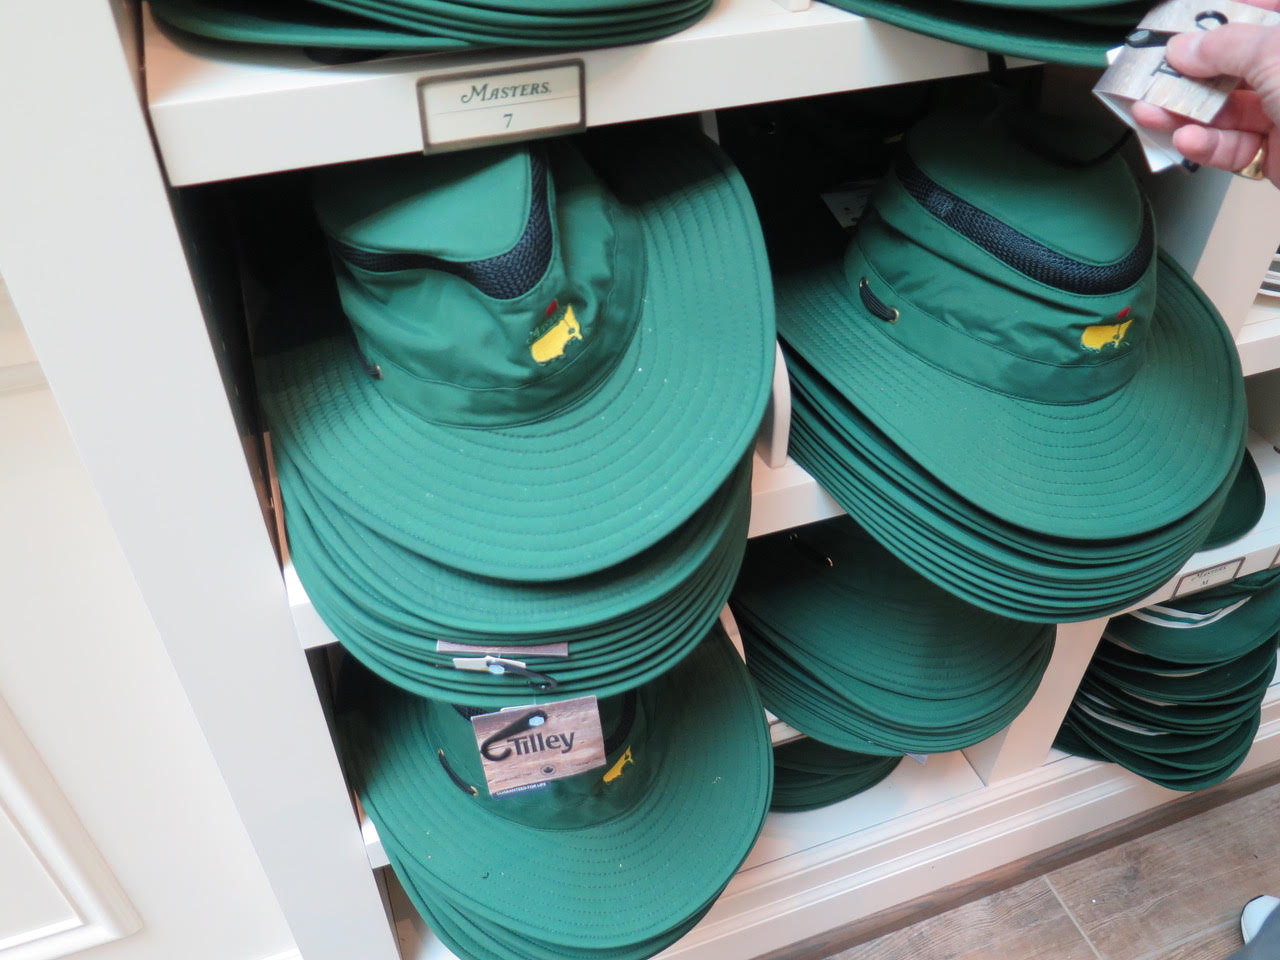 Sale > masters tilley hat > in stock